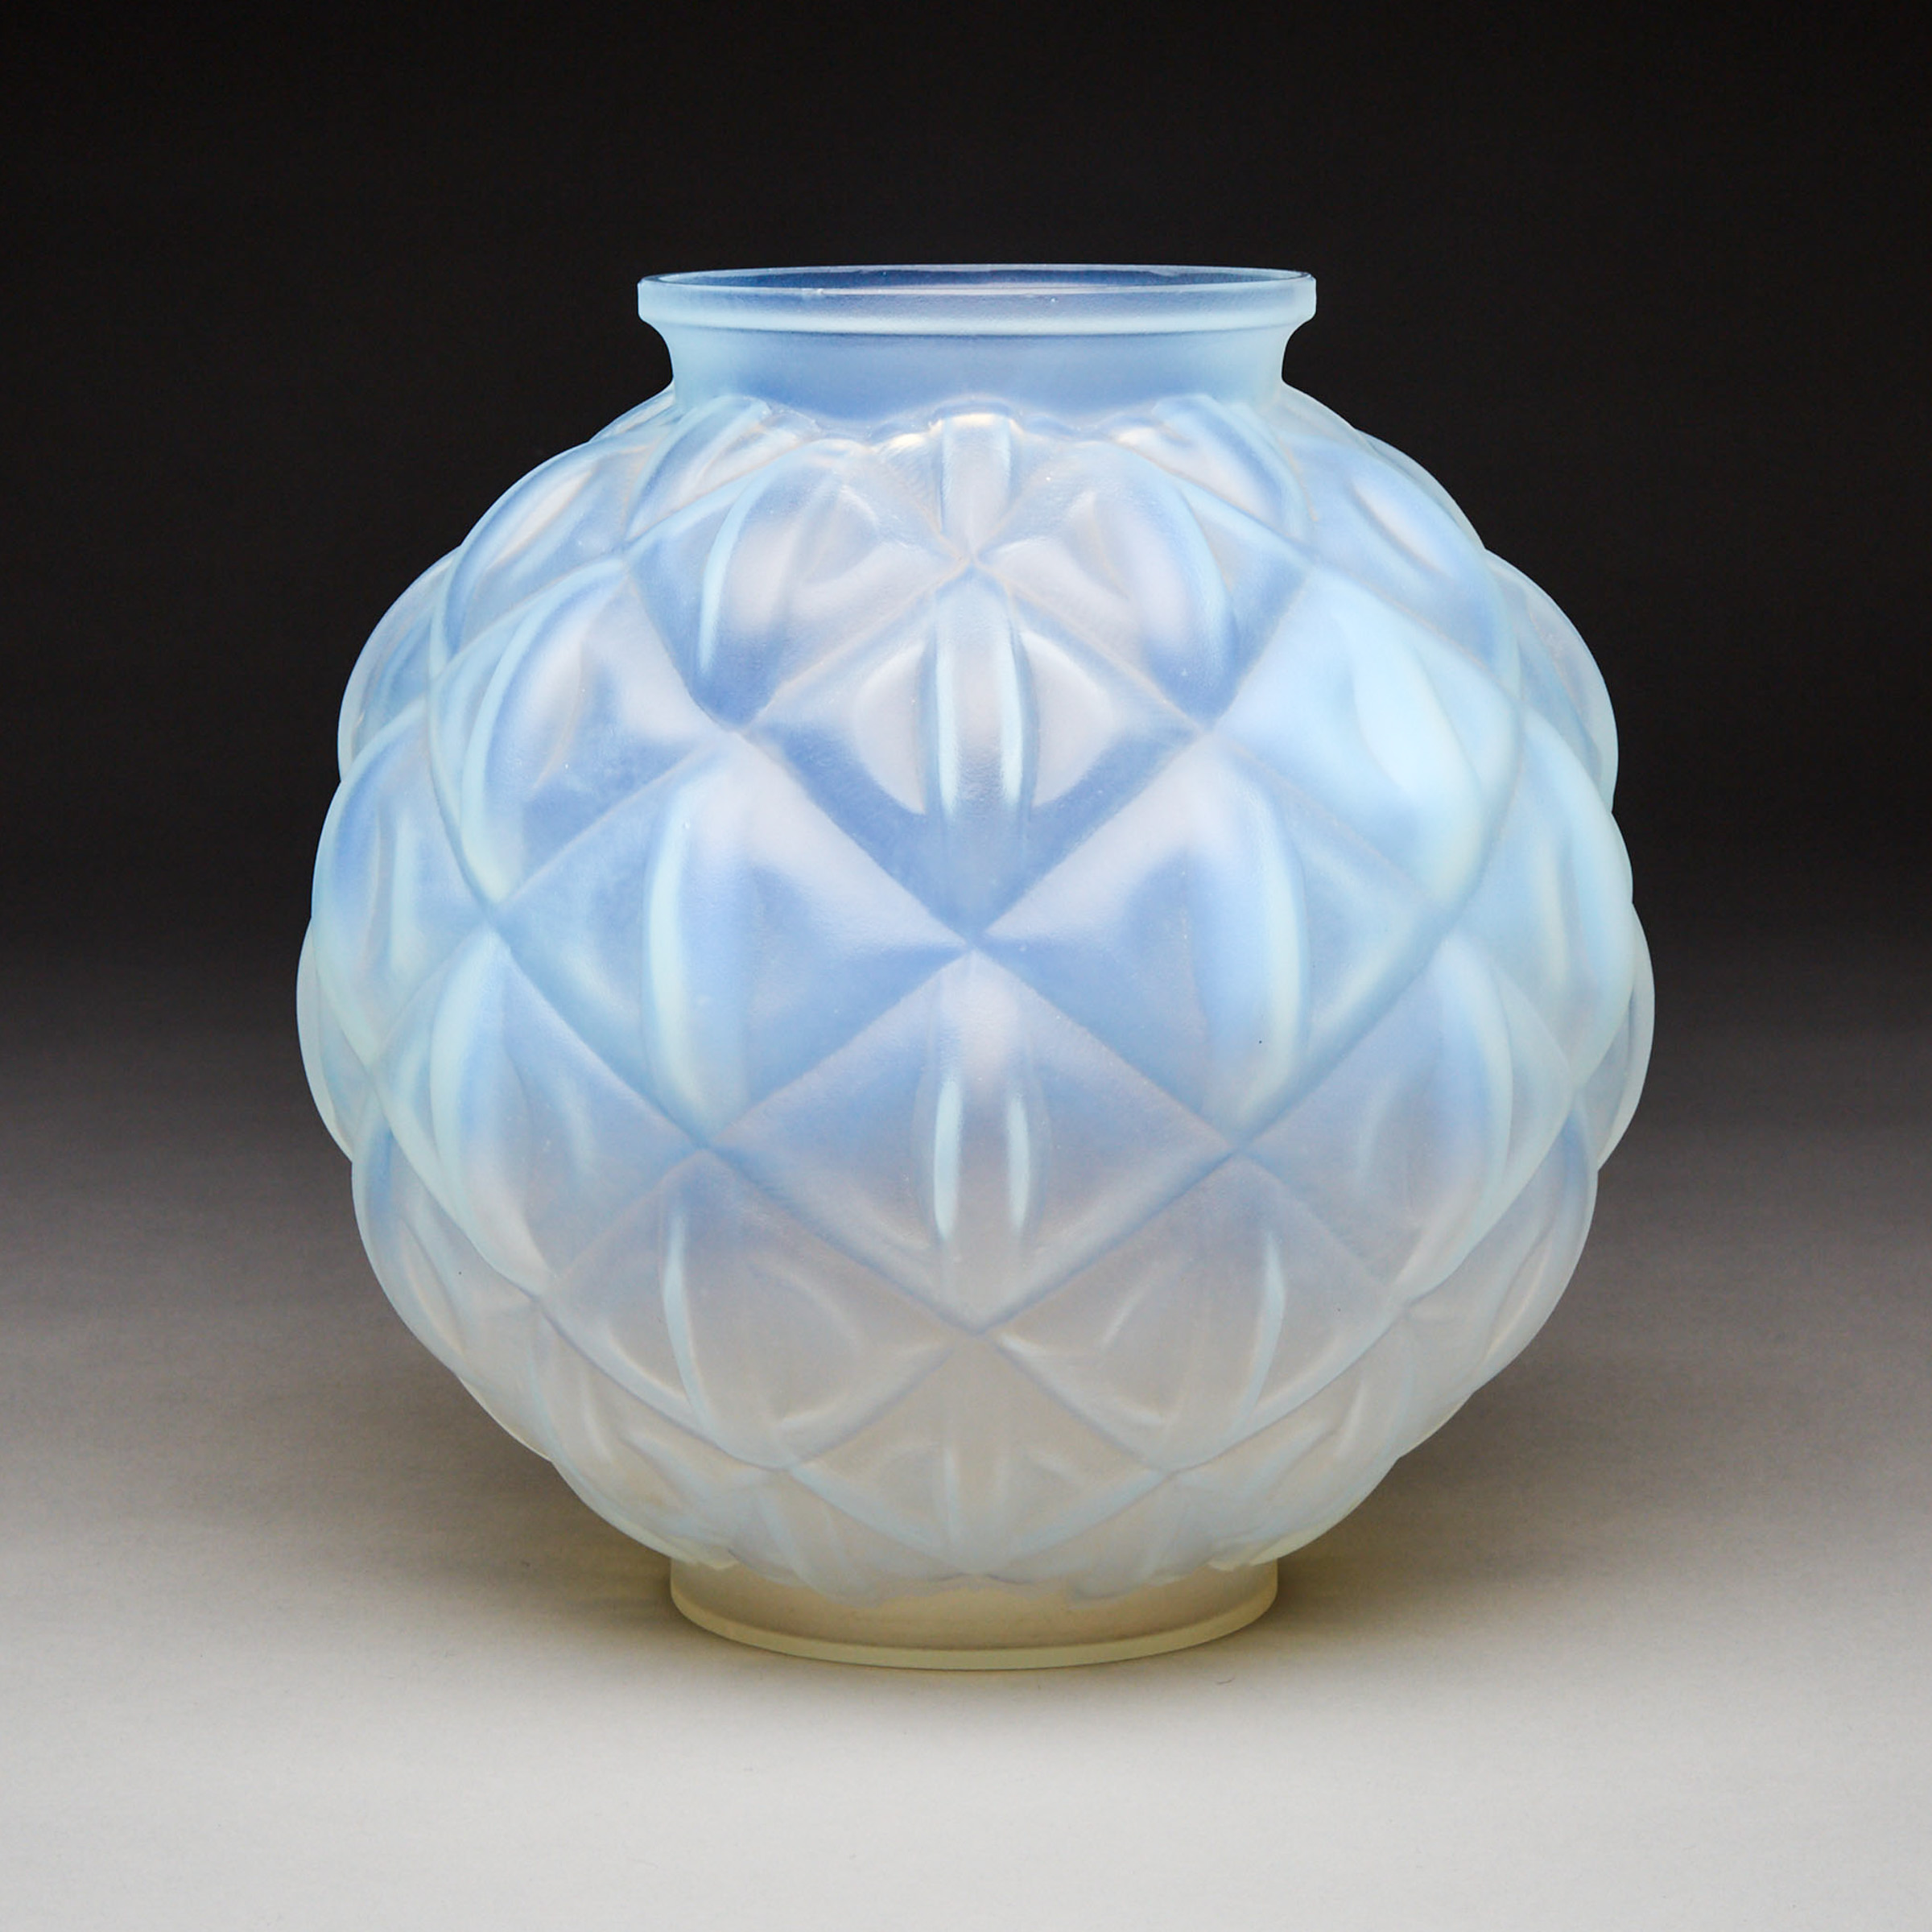 Carrillo Moulded and Frosted Glass Vase, c.1930